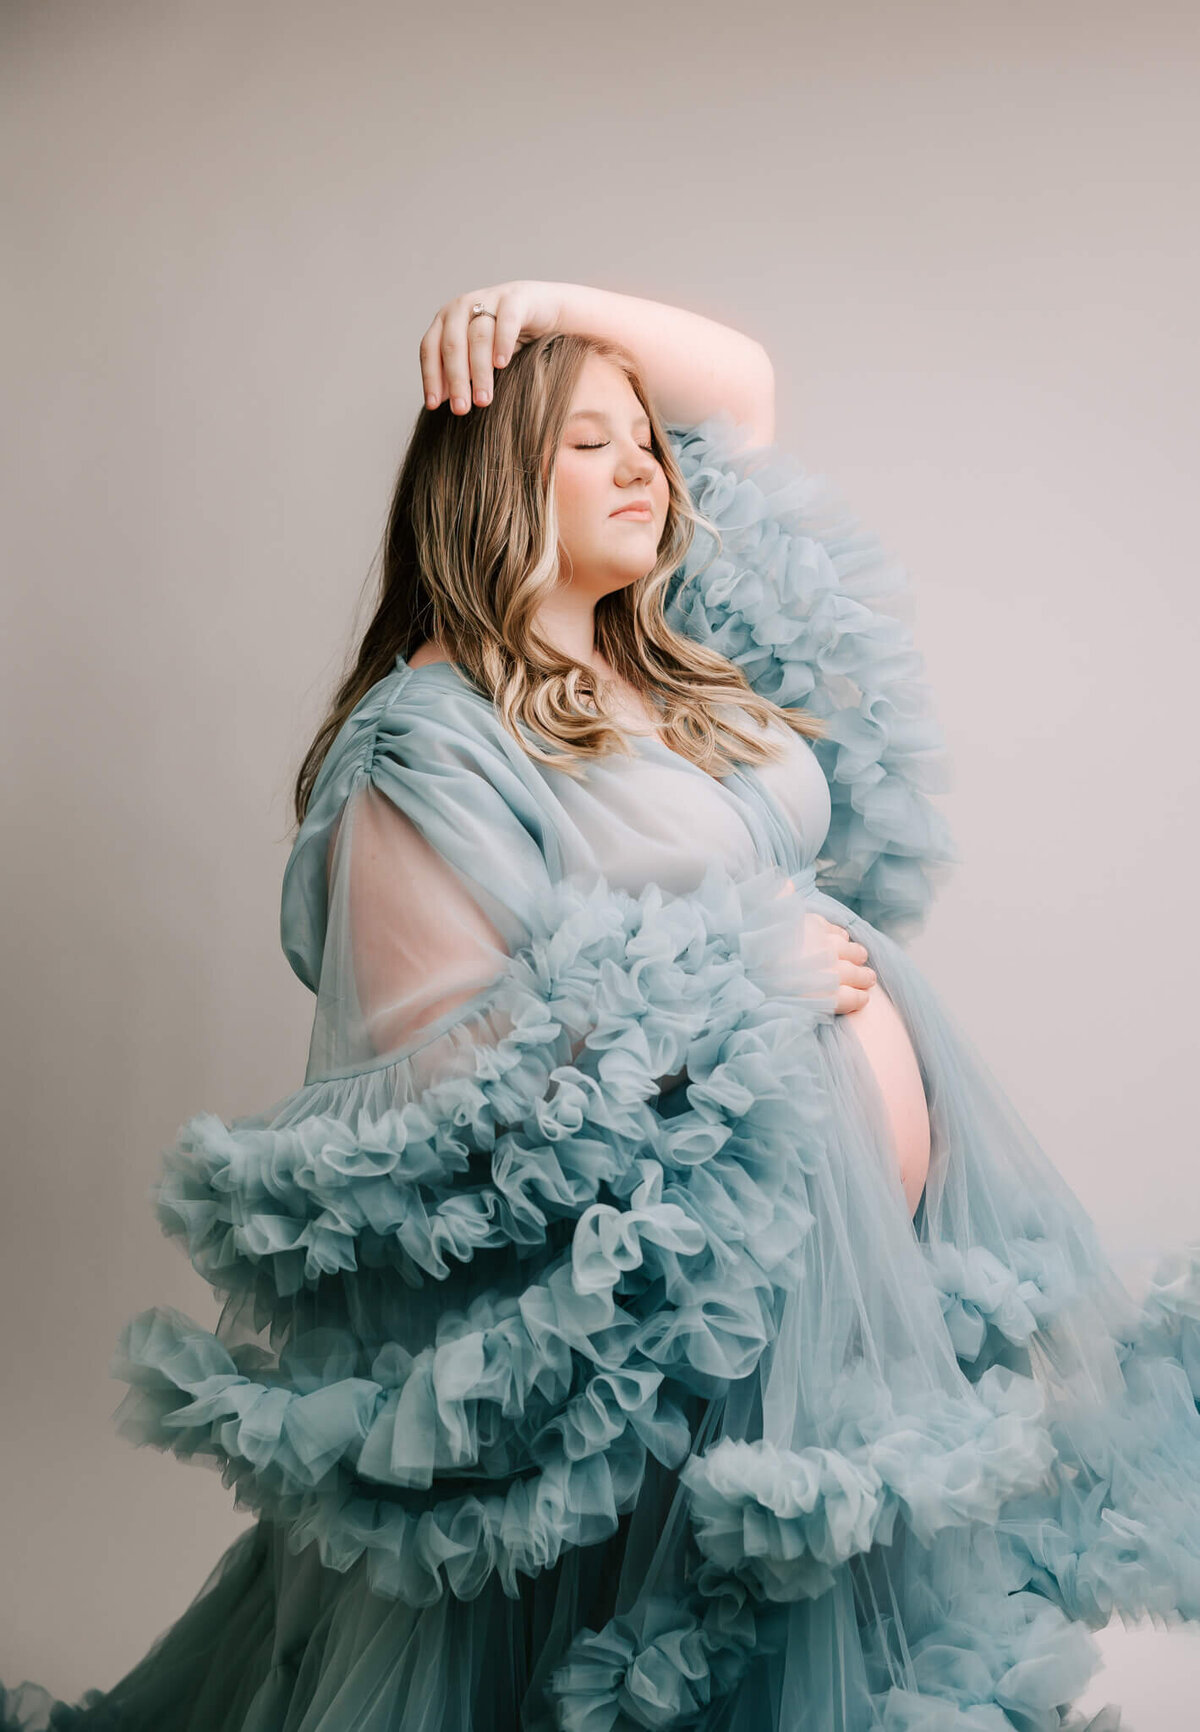 pregnant mom with belly showing in blue tulle dress. She has her eyes closed